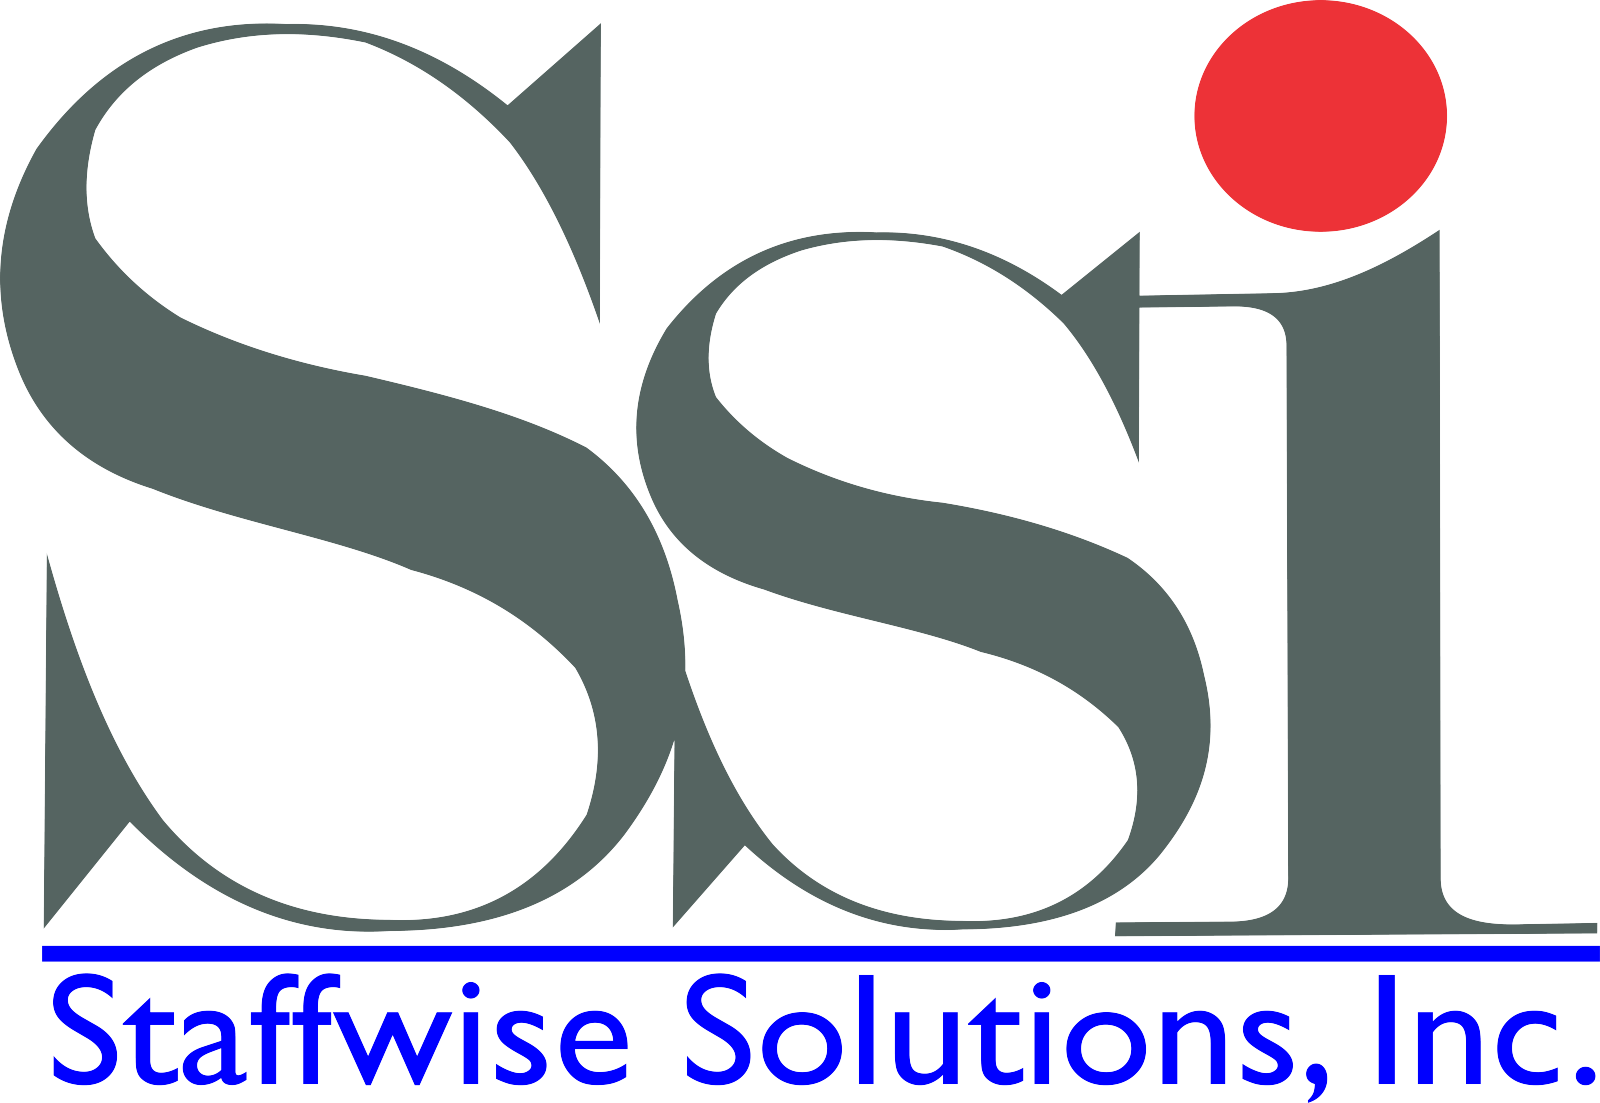 Staffwise Solutions